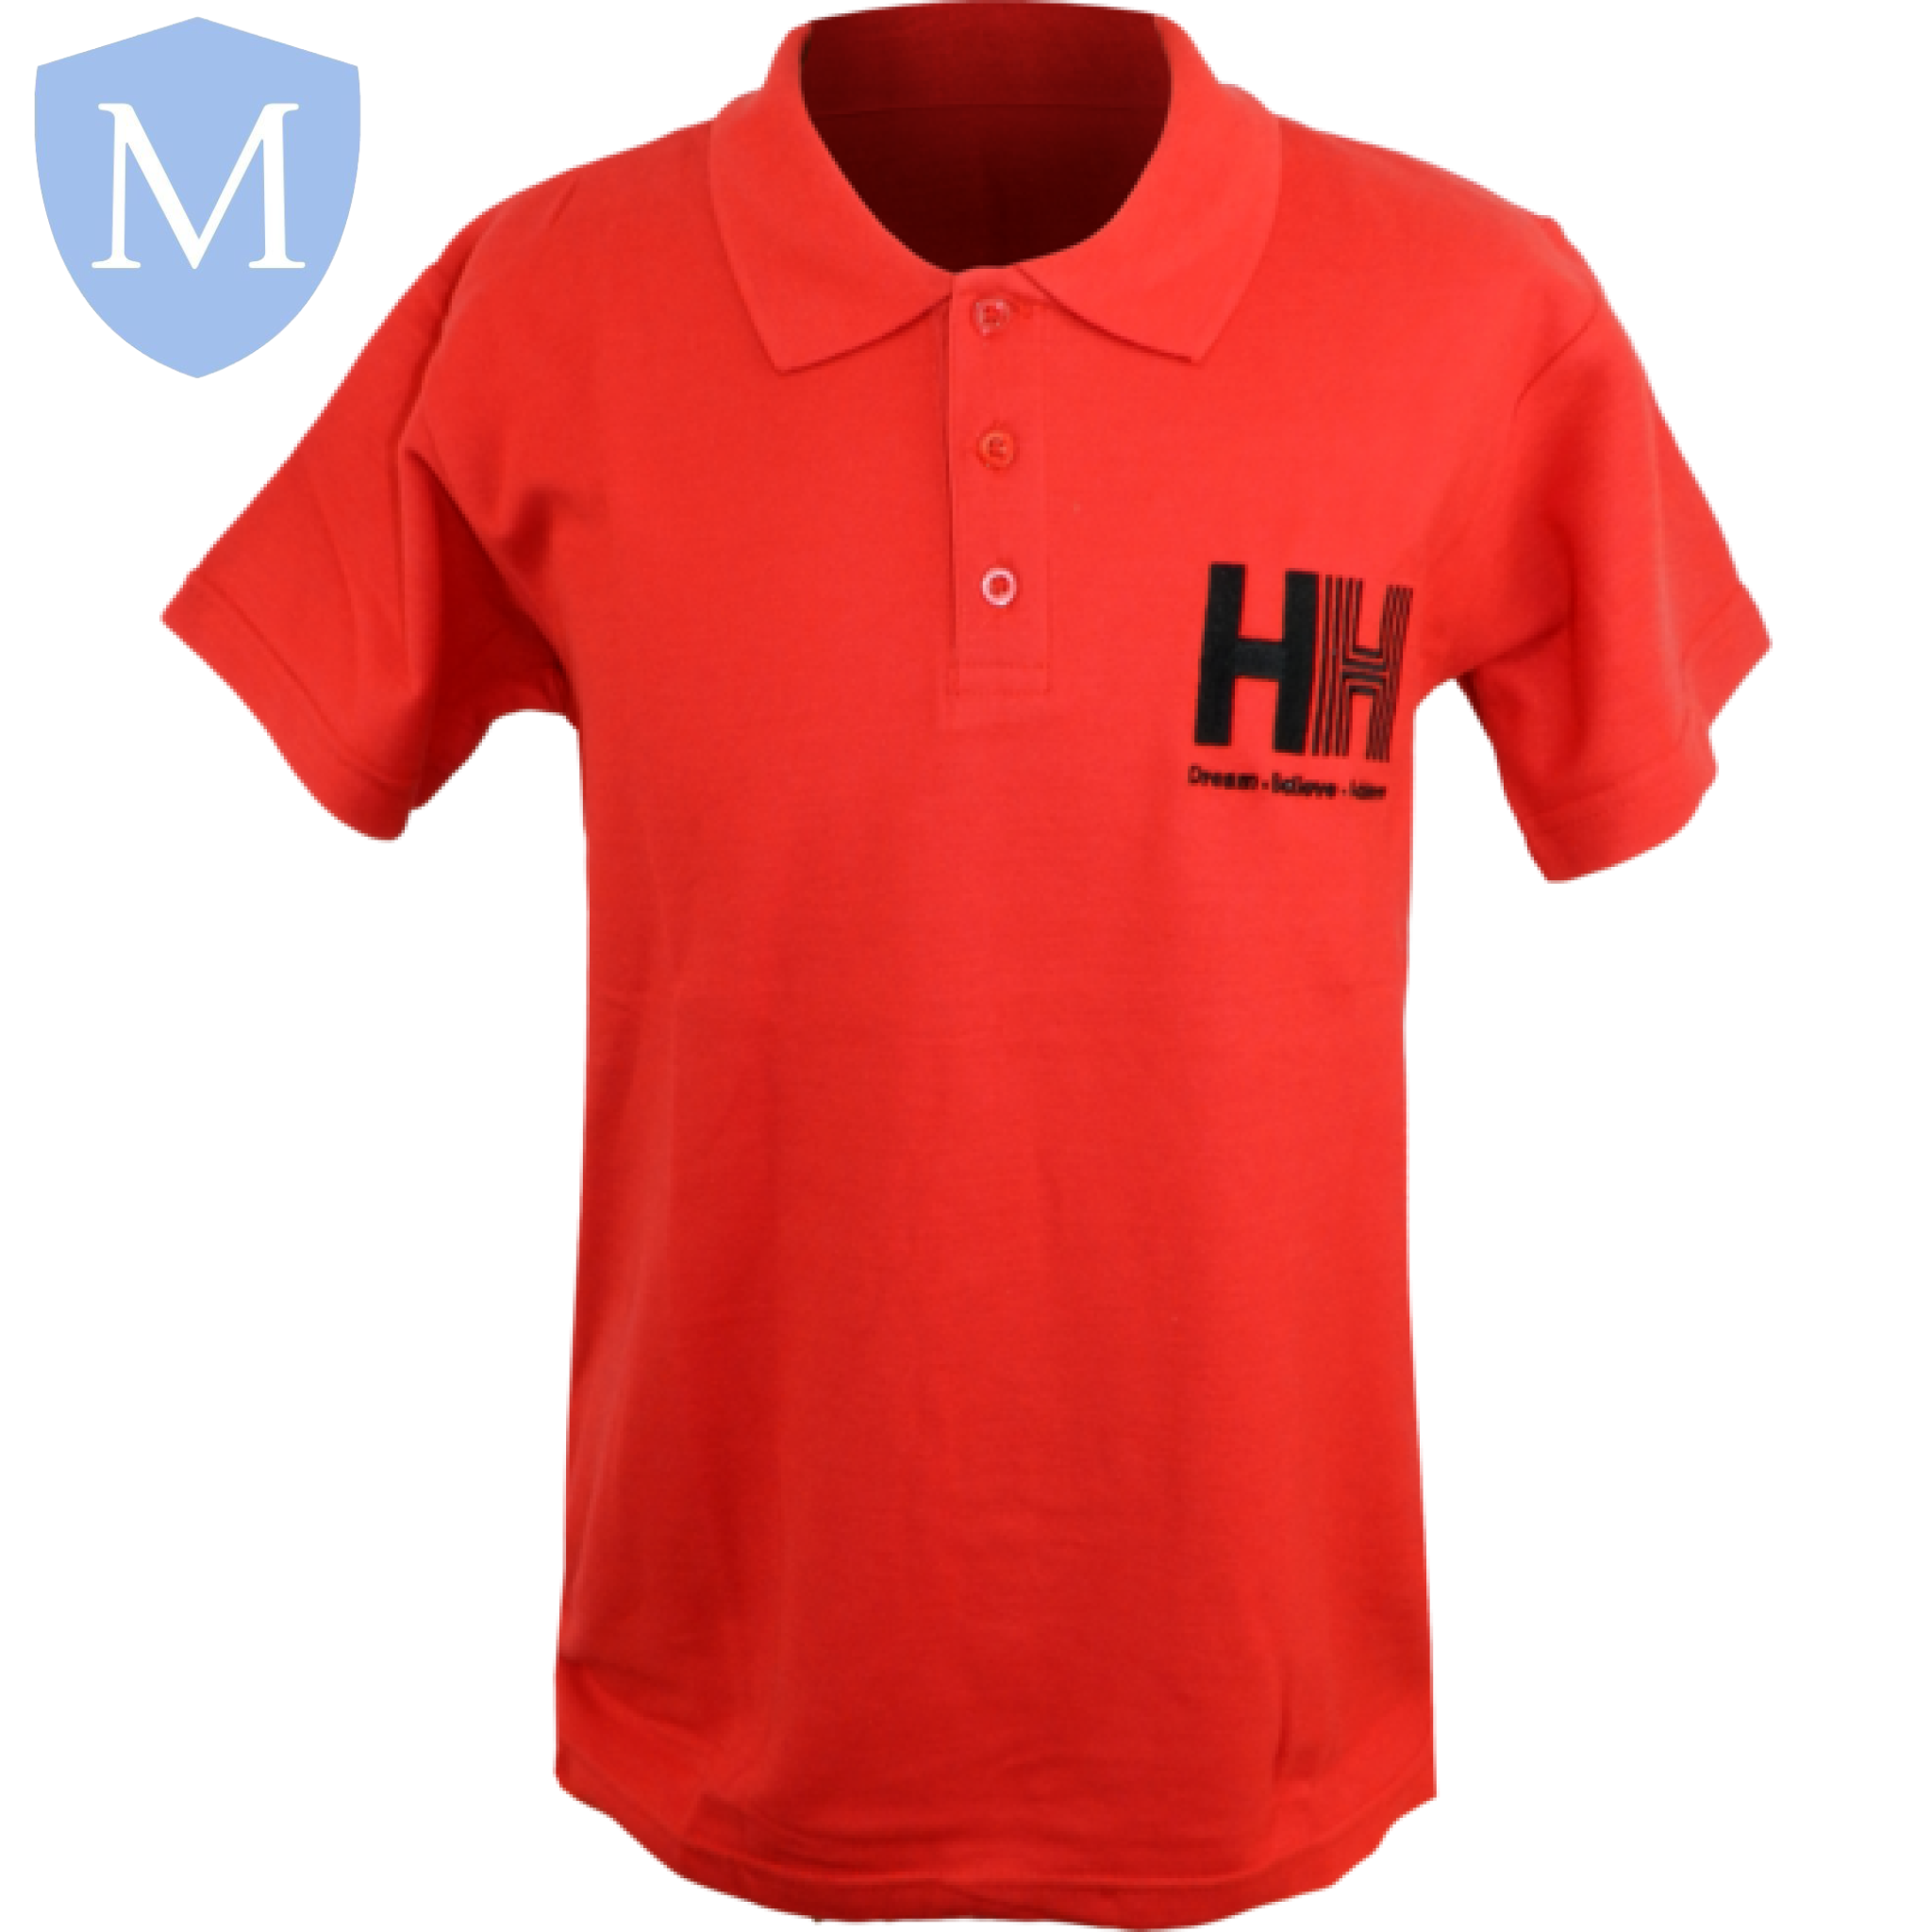 Hodge Hill Sports & Enterprise College P.E Polo Shirt 11-12 Years,13 Years,2XL,9-10 Years,Large,Medium,Small,XL